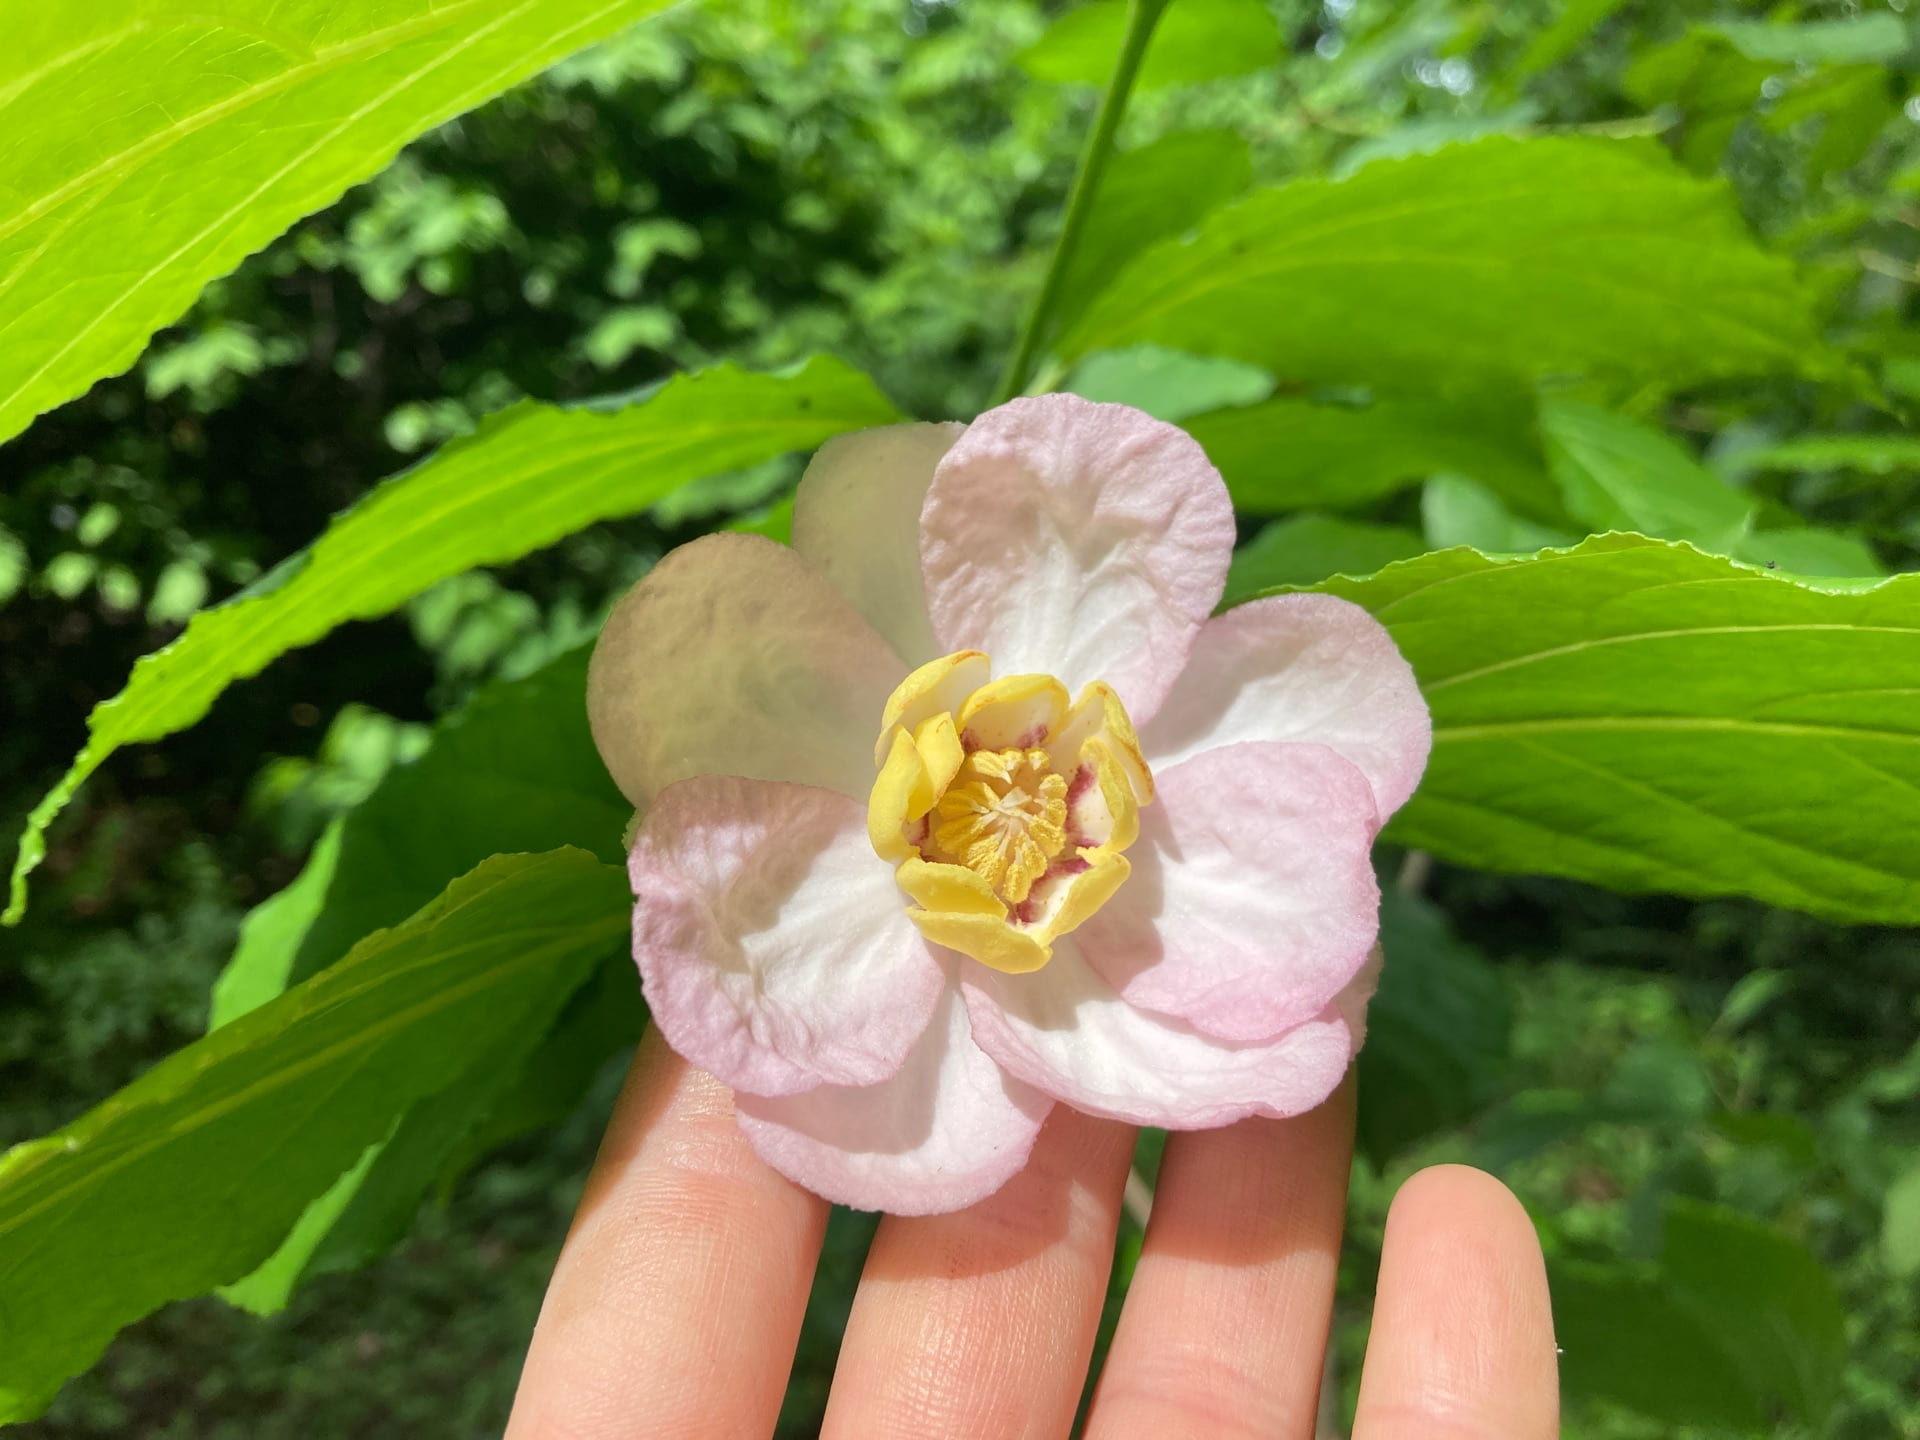 Calycanthus sinensis is a Chinese relative of our native Calycanthus floridus. The flowers vary in petal shape, color, and size.